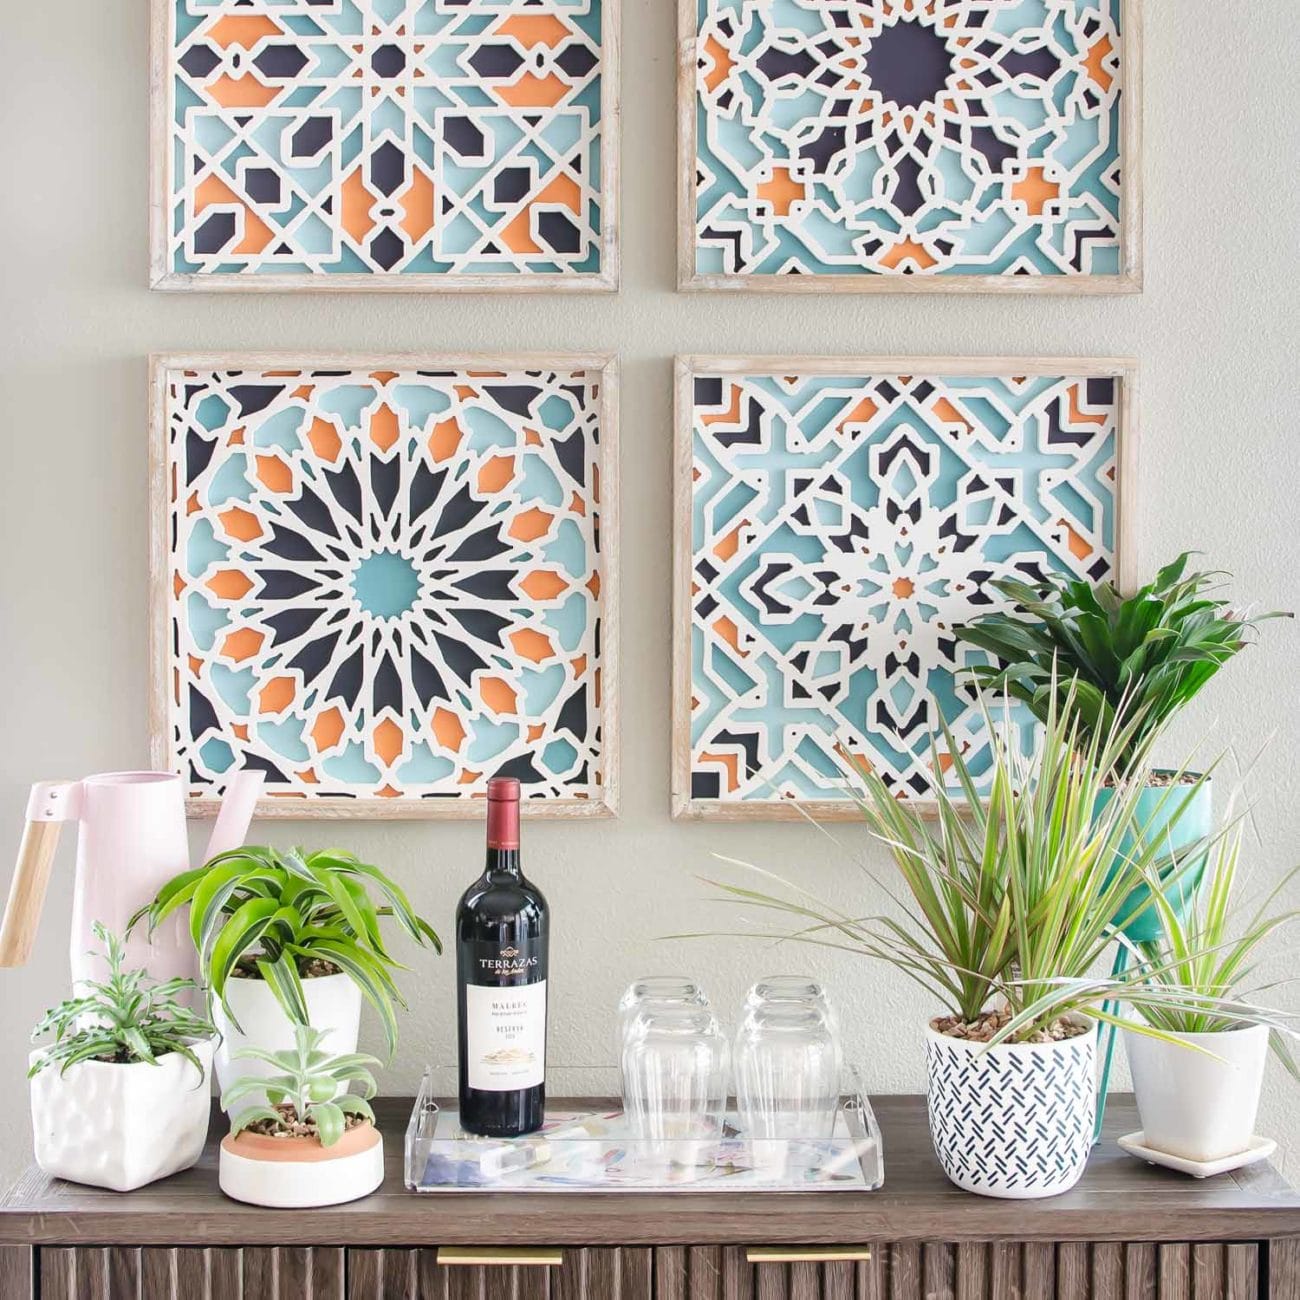 Colorful art and console styling in small kitchen nook.